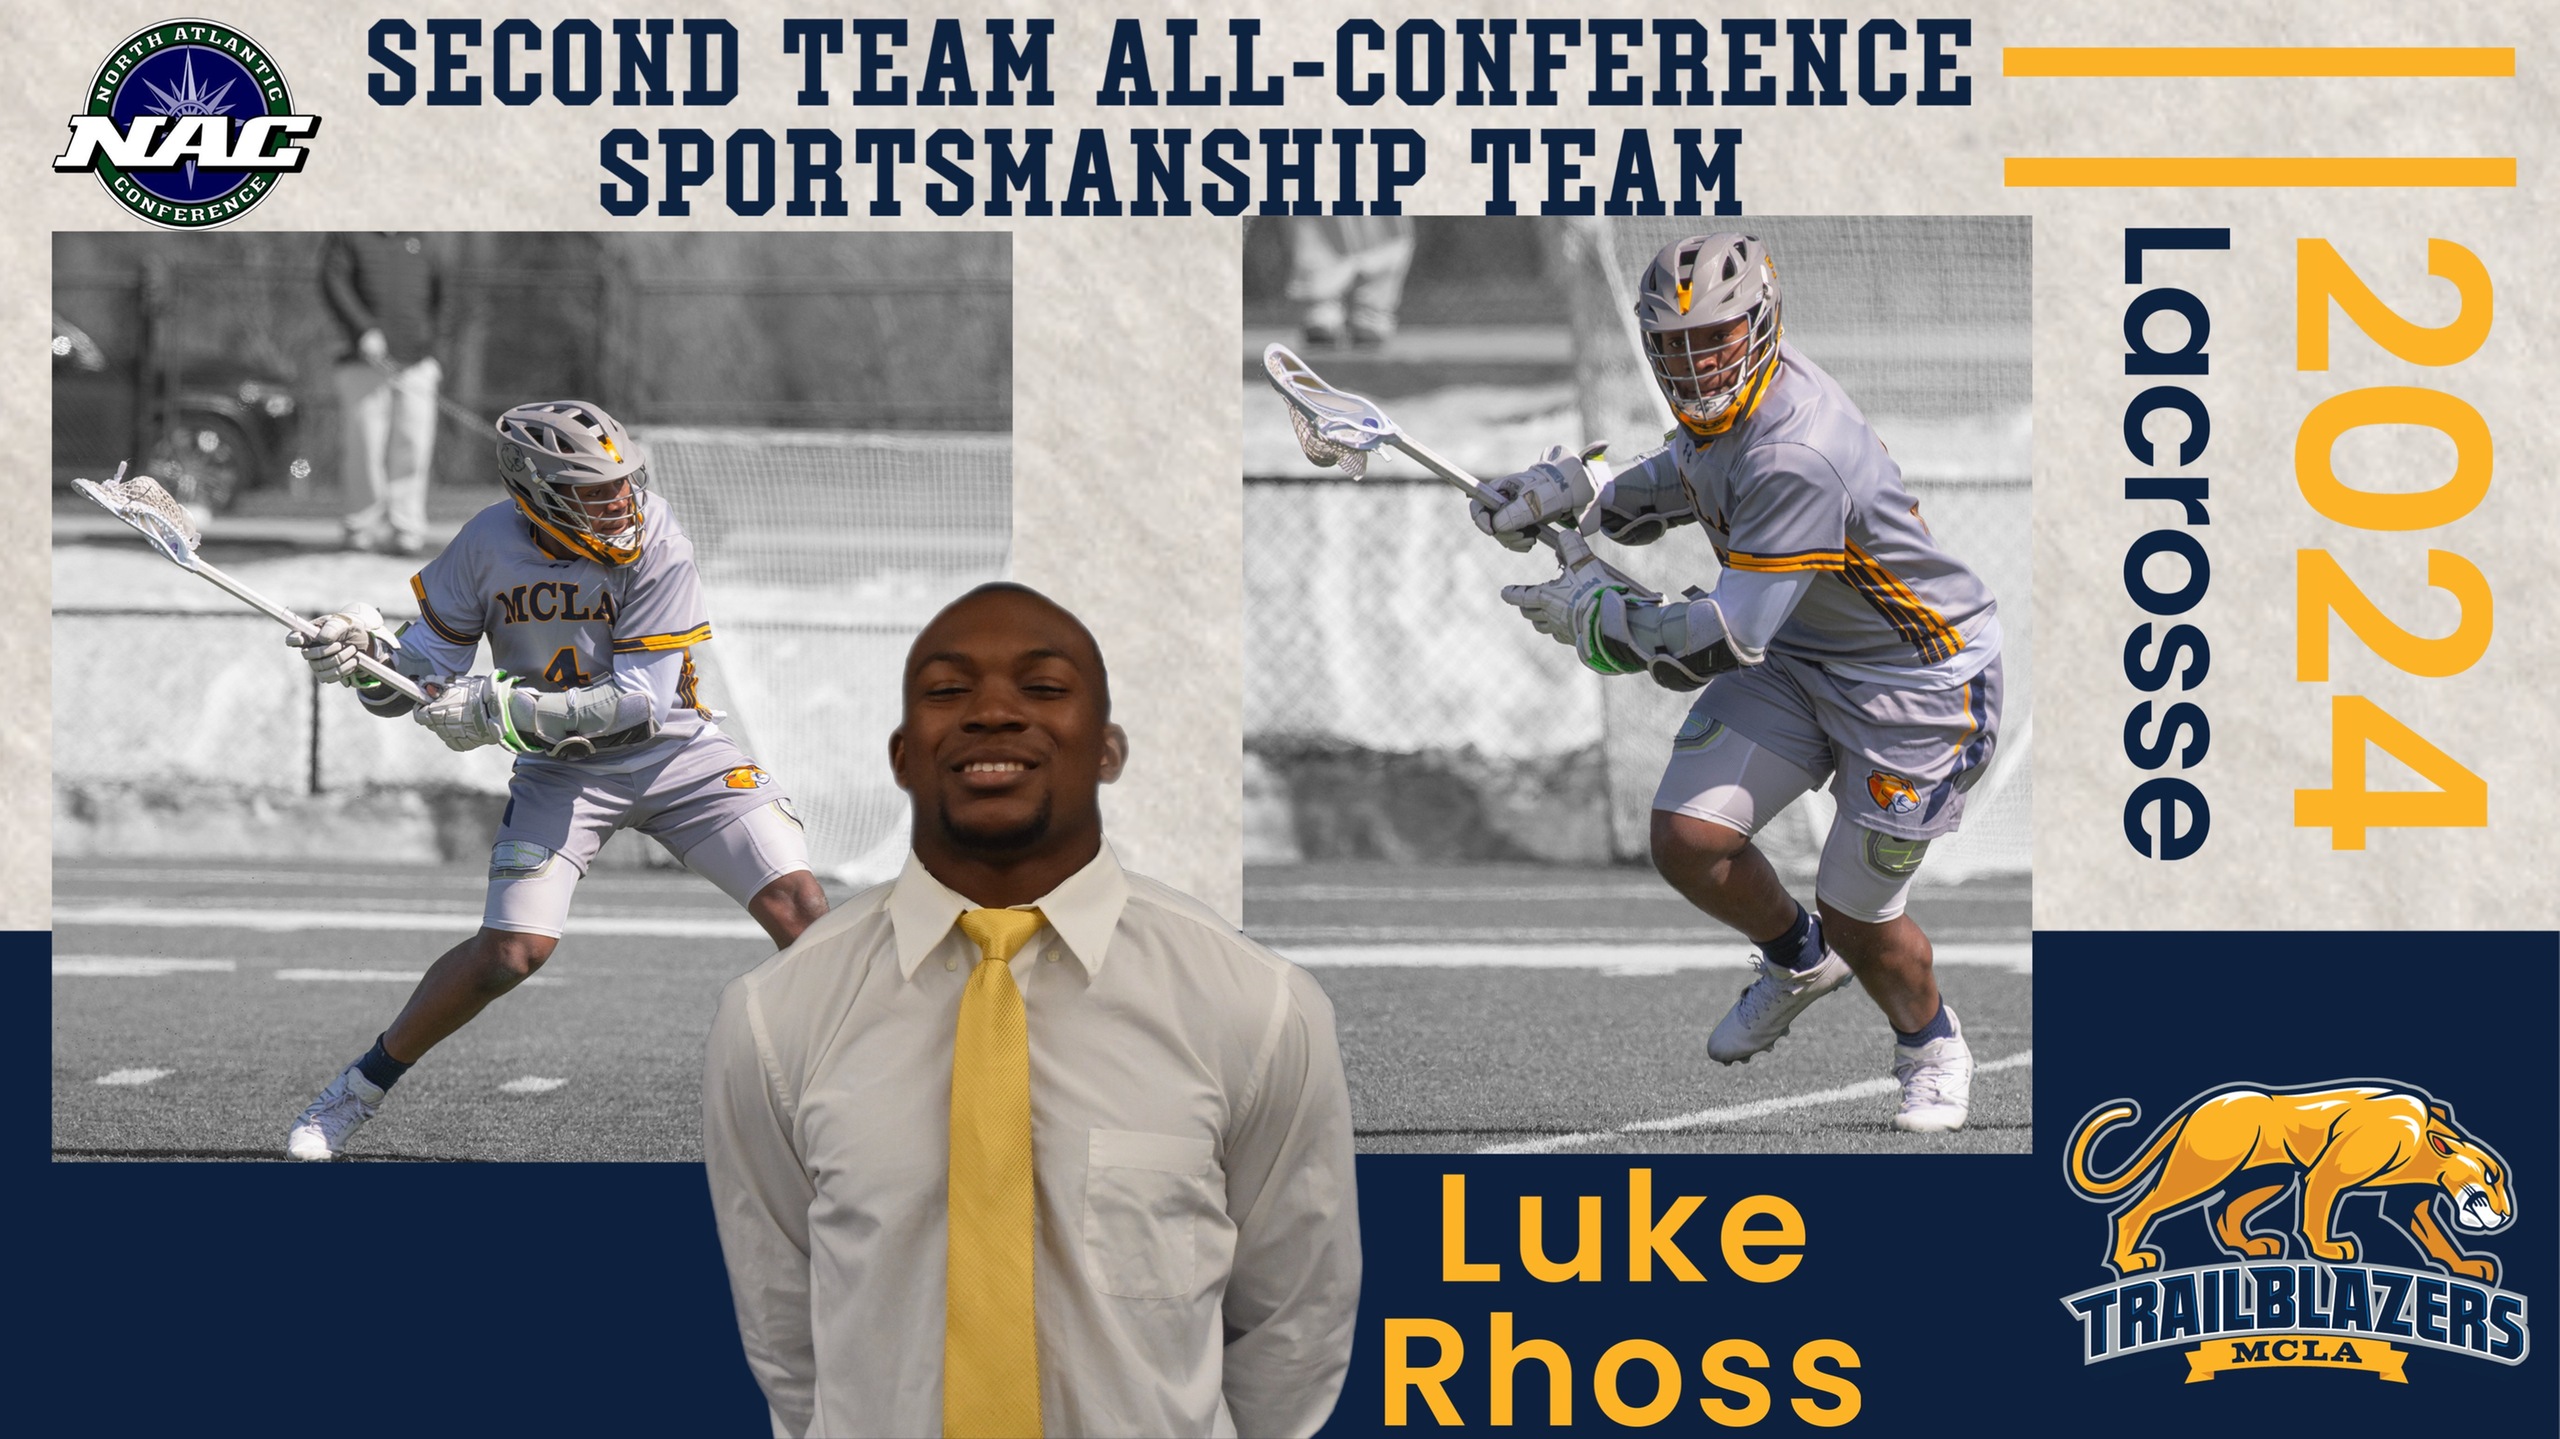 Rhoss named to NAC All-Conference Second Team & Sportsmanship Team